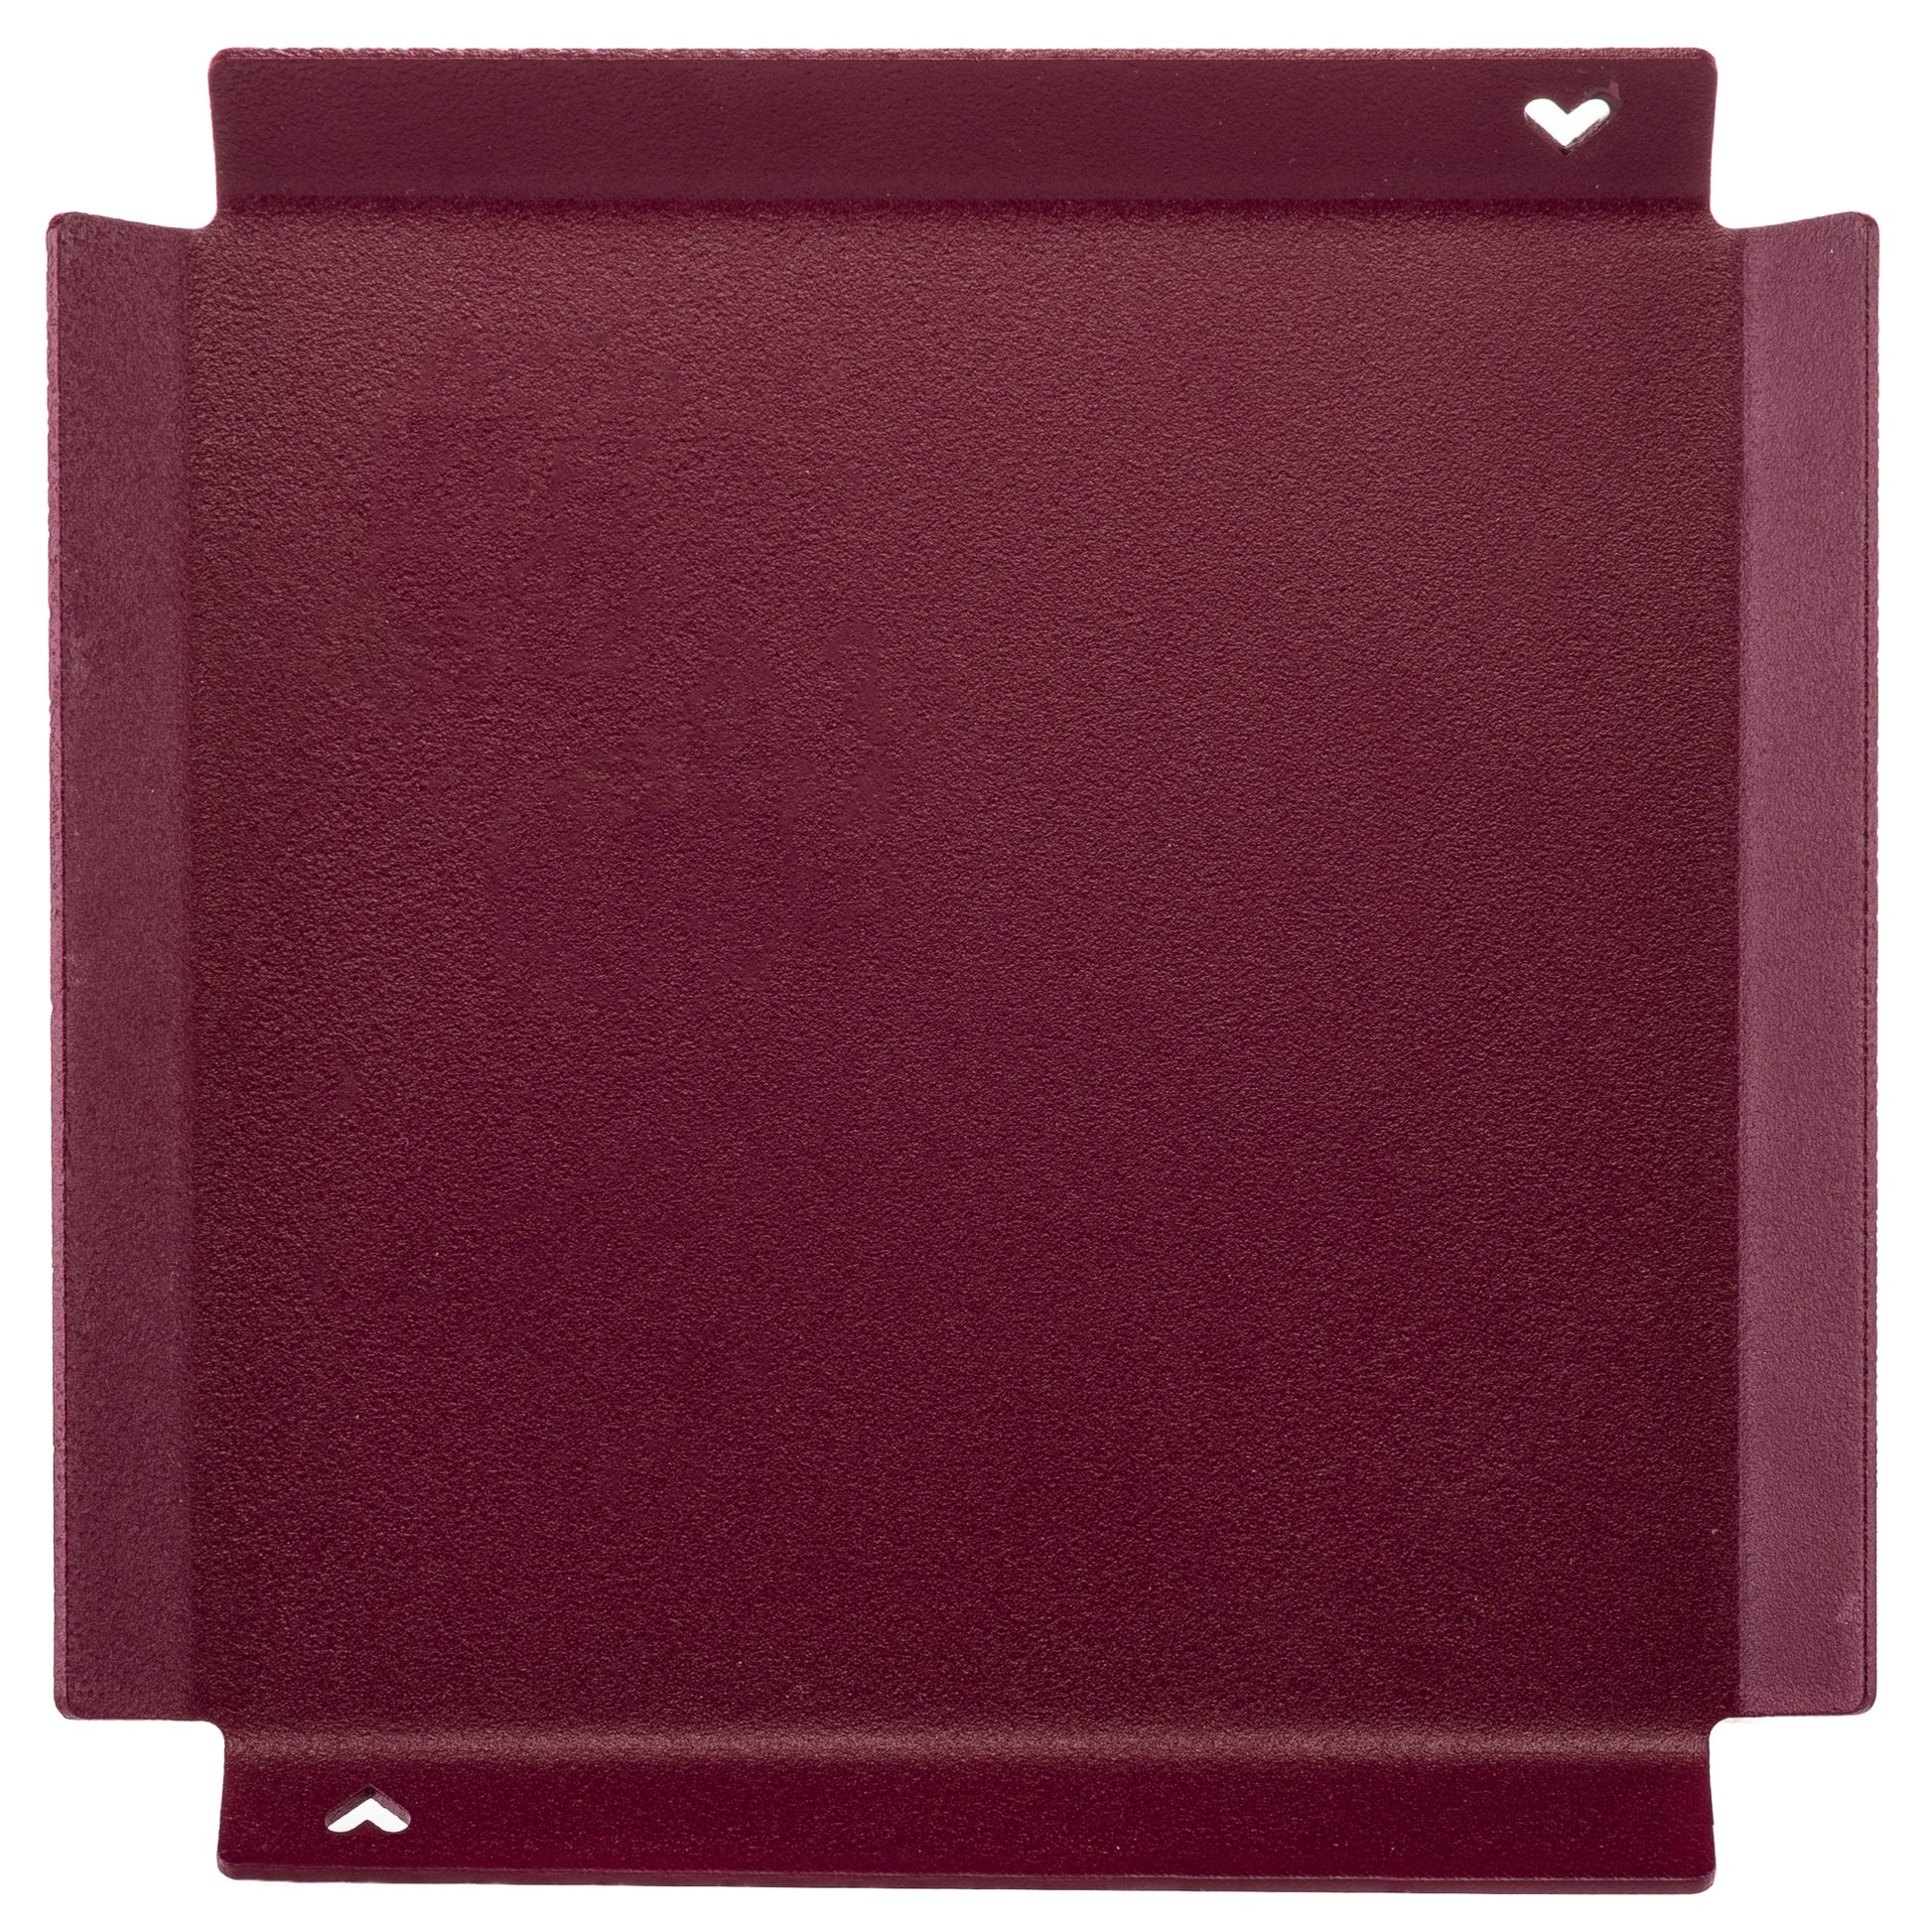 Studio Mippe tray small paars bordeaux magenta